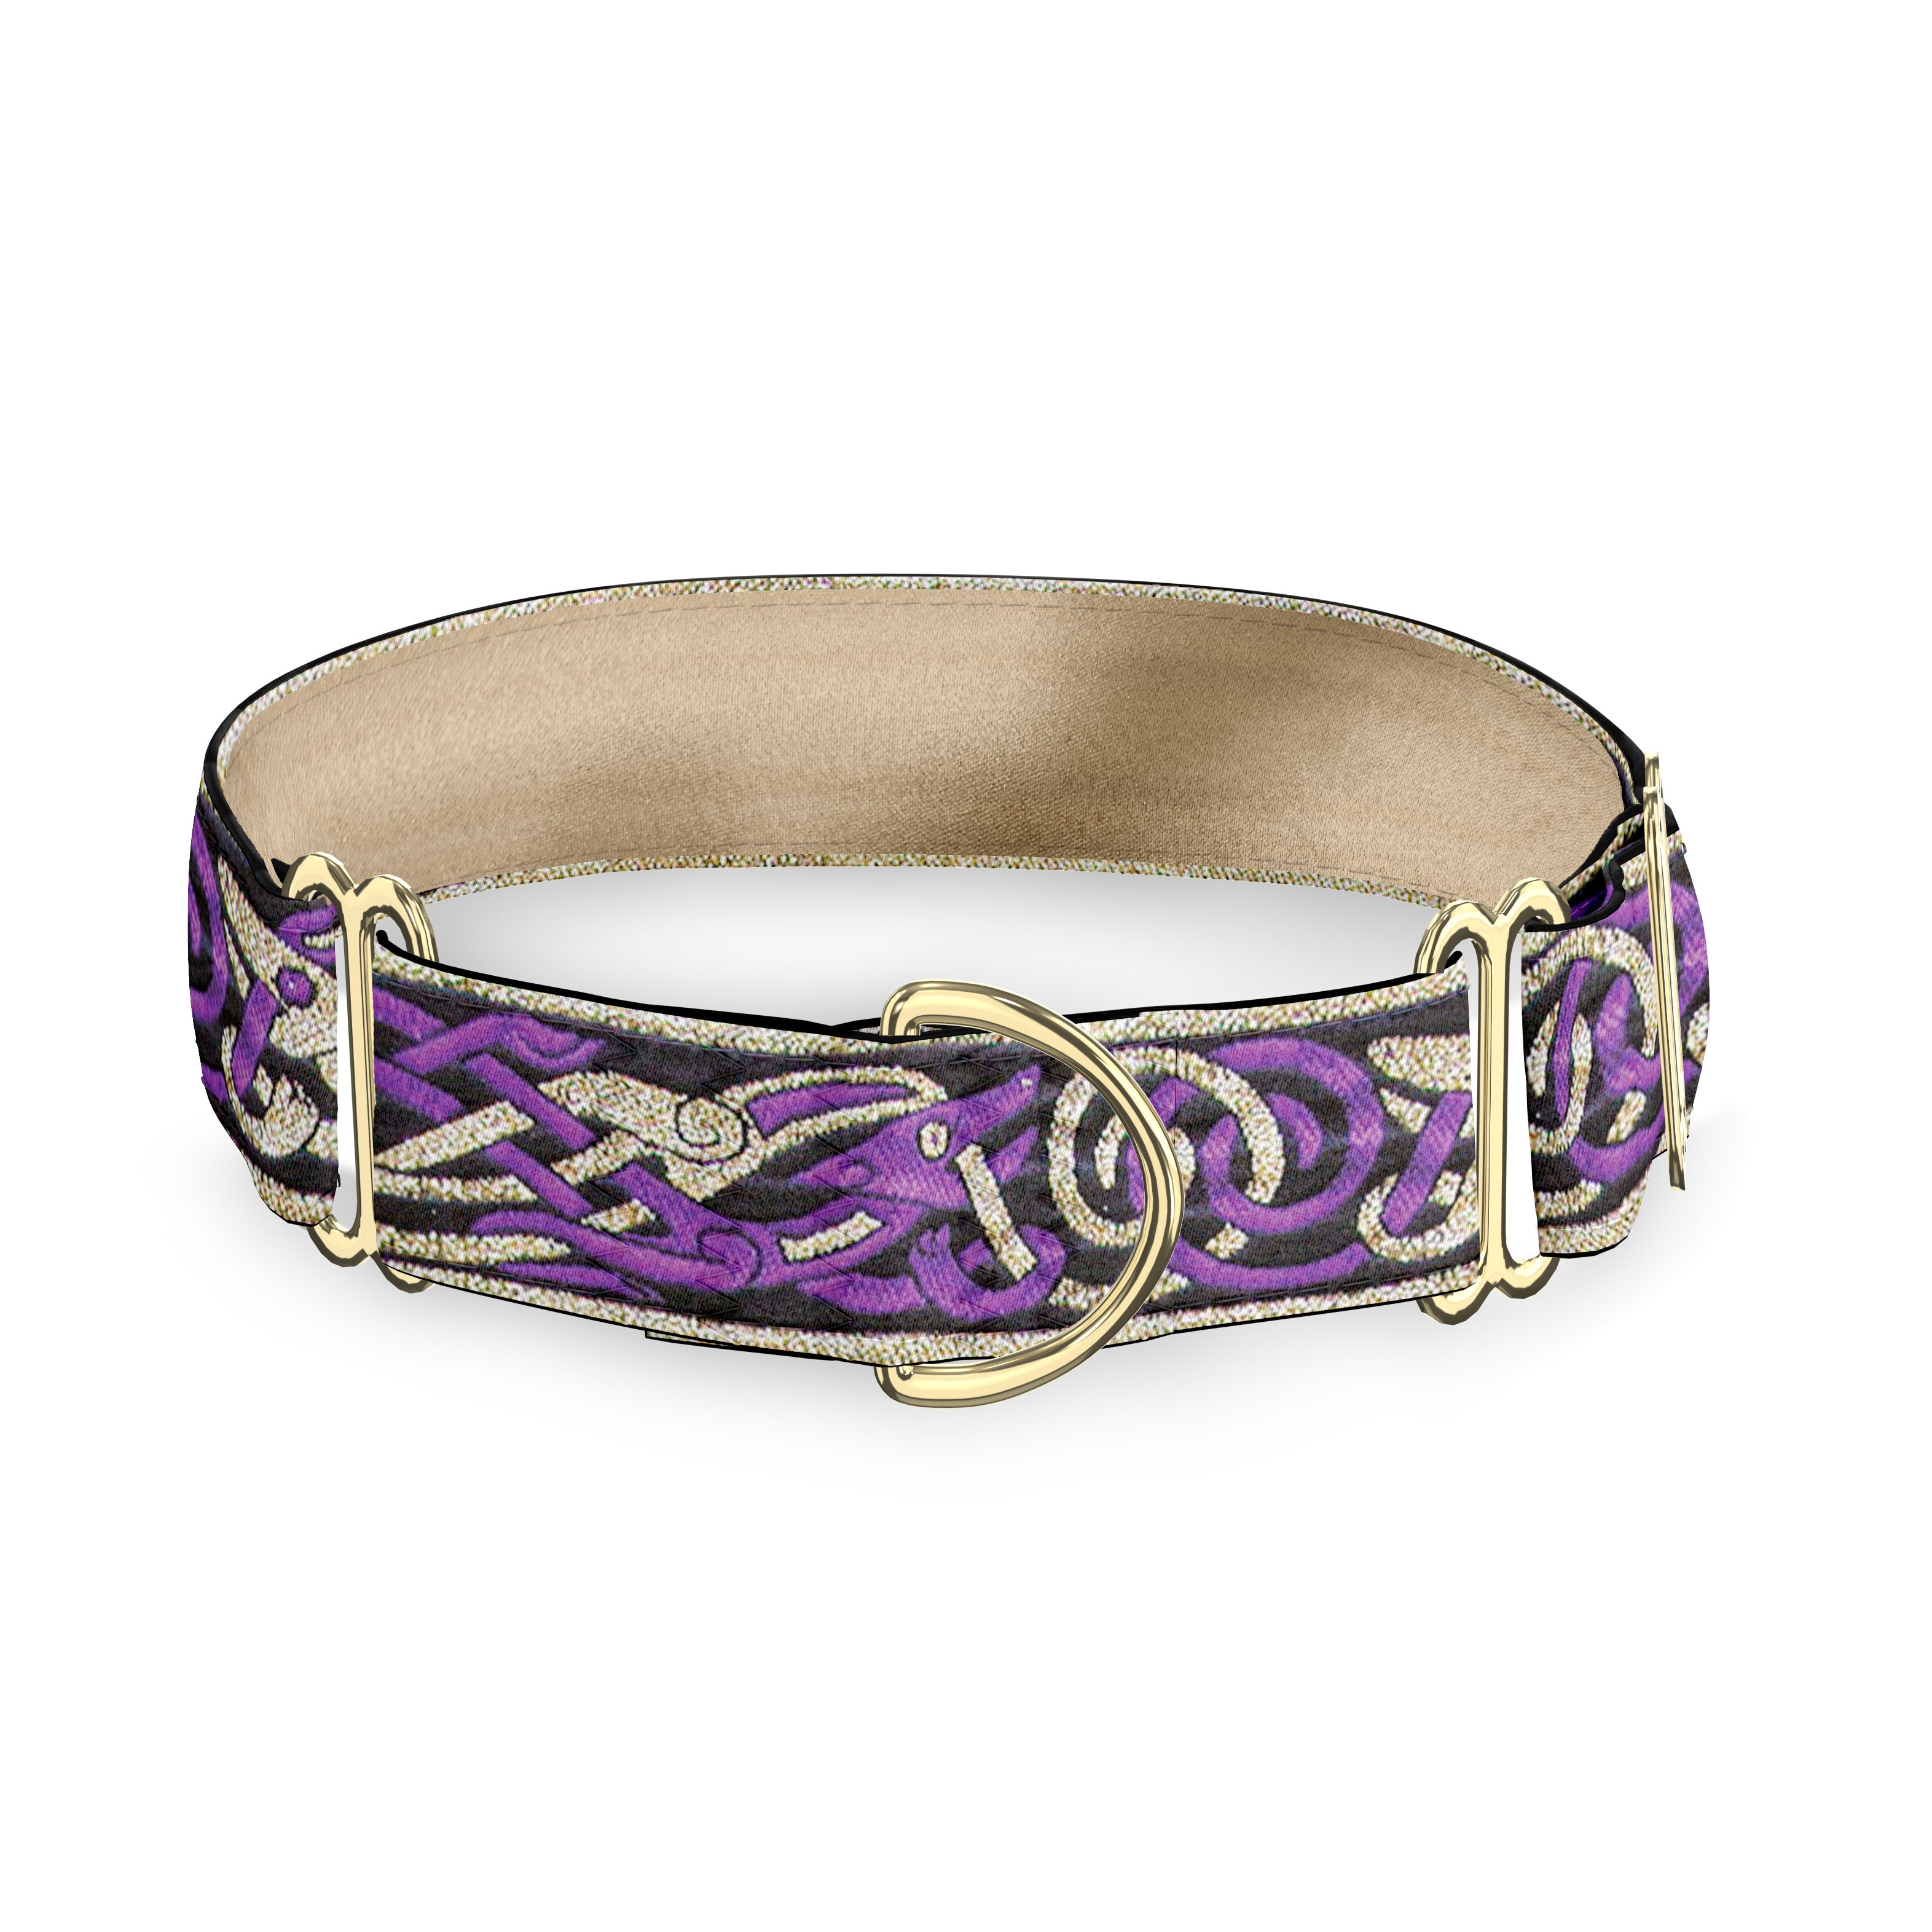 Kells Hounds Purple and Gold 2 Inch Masterpiece Dog Collar